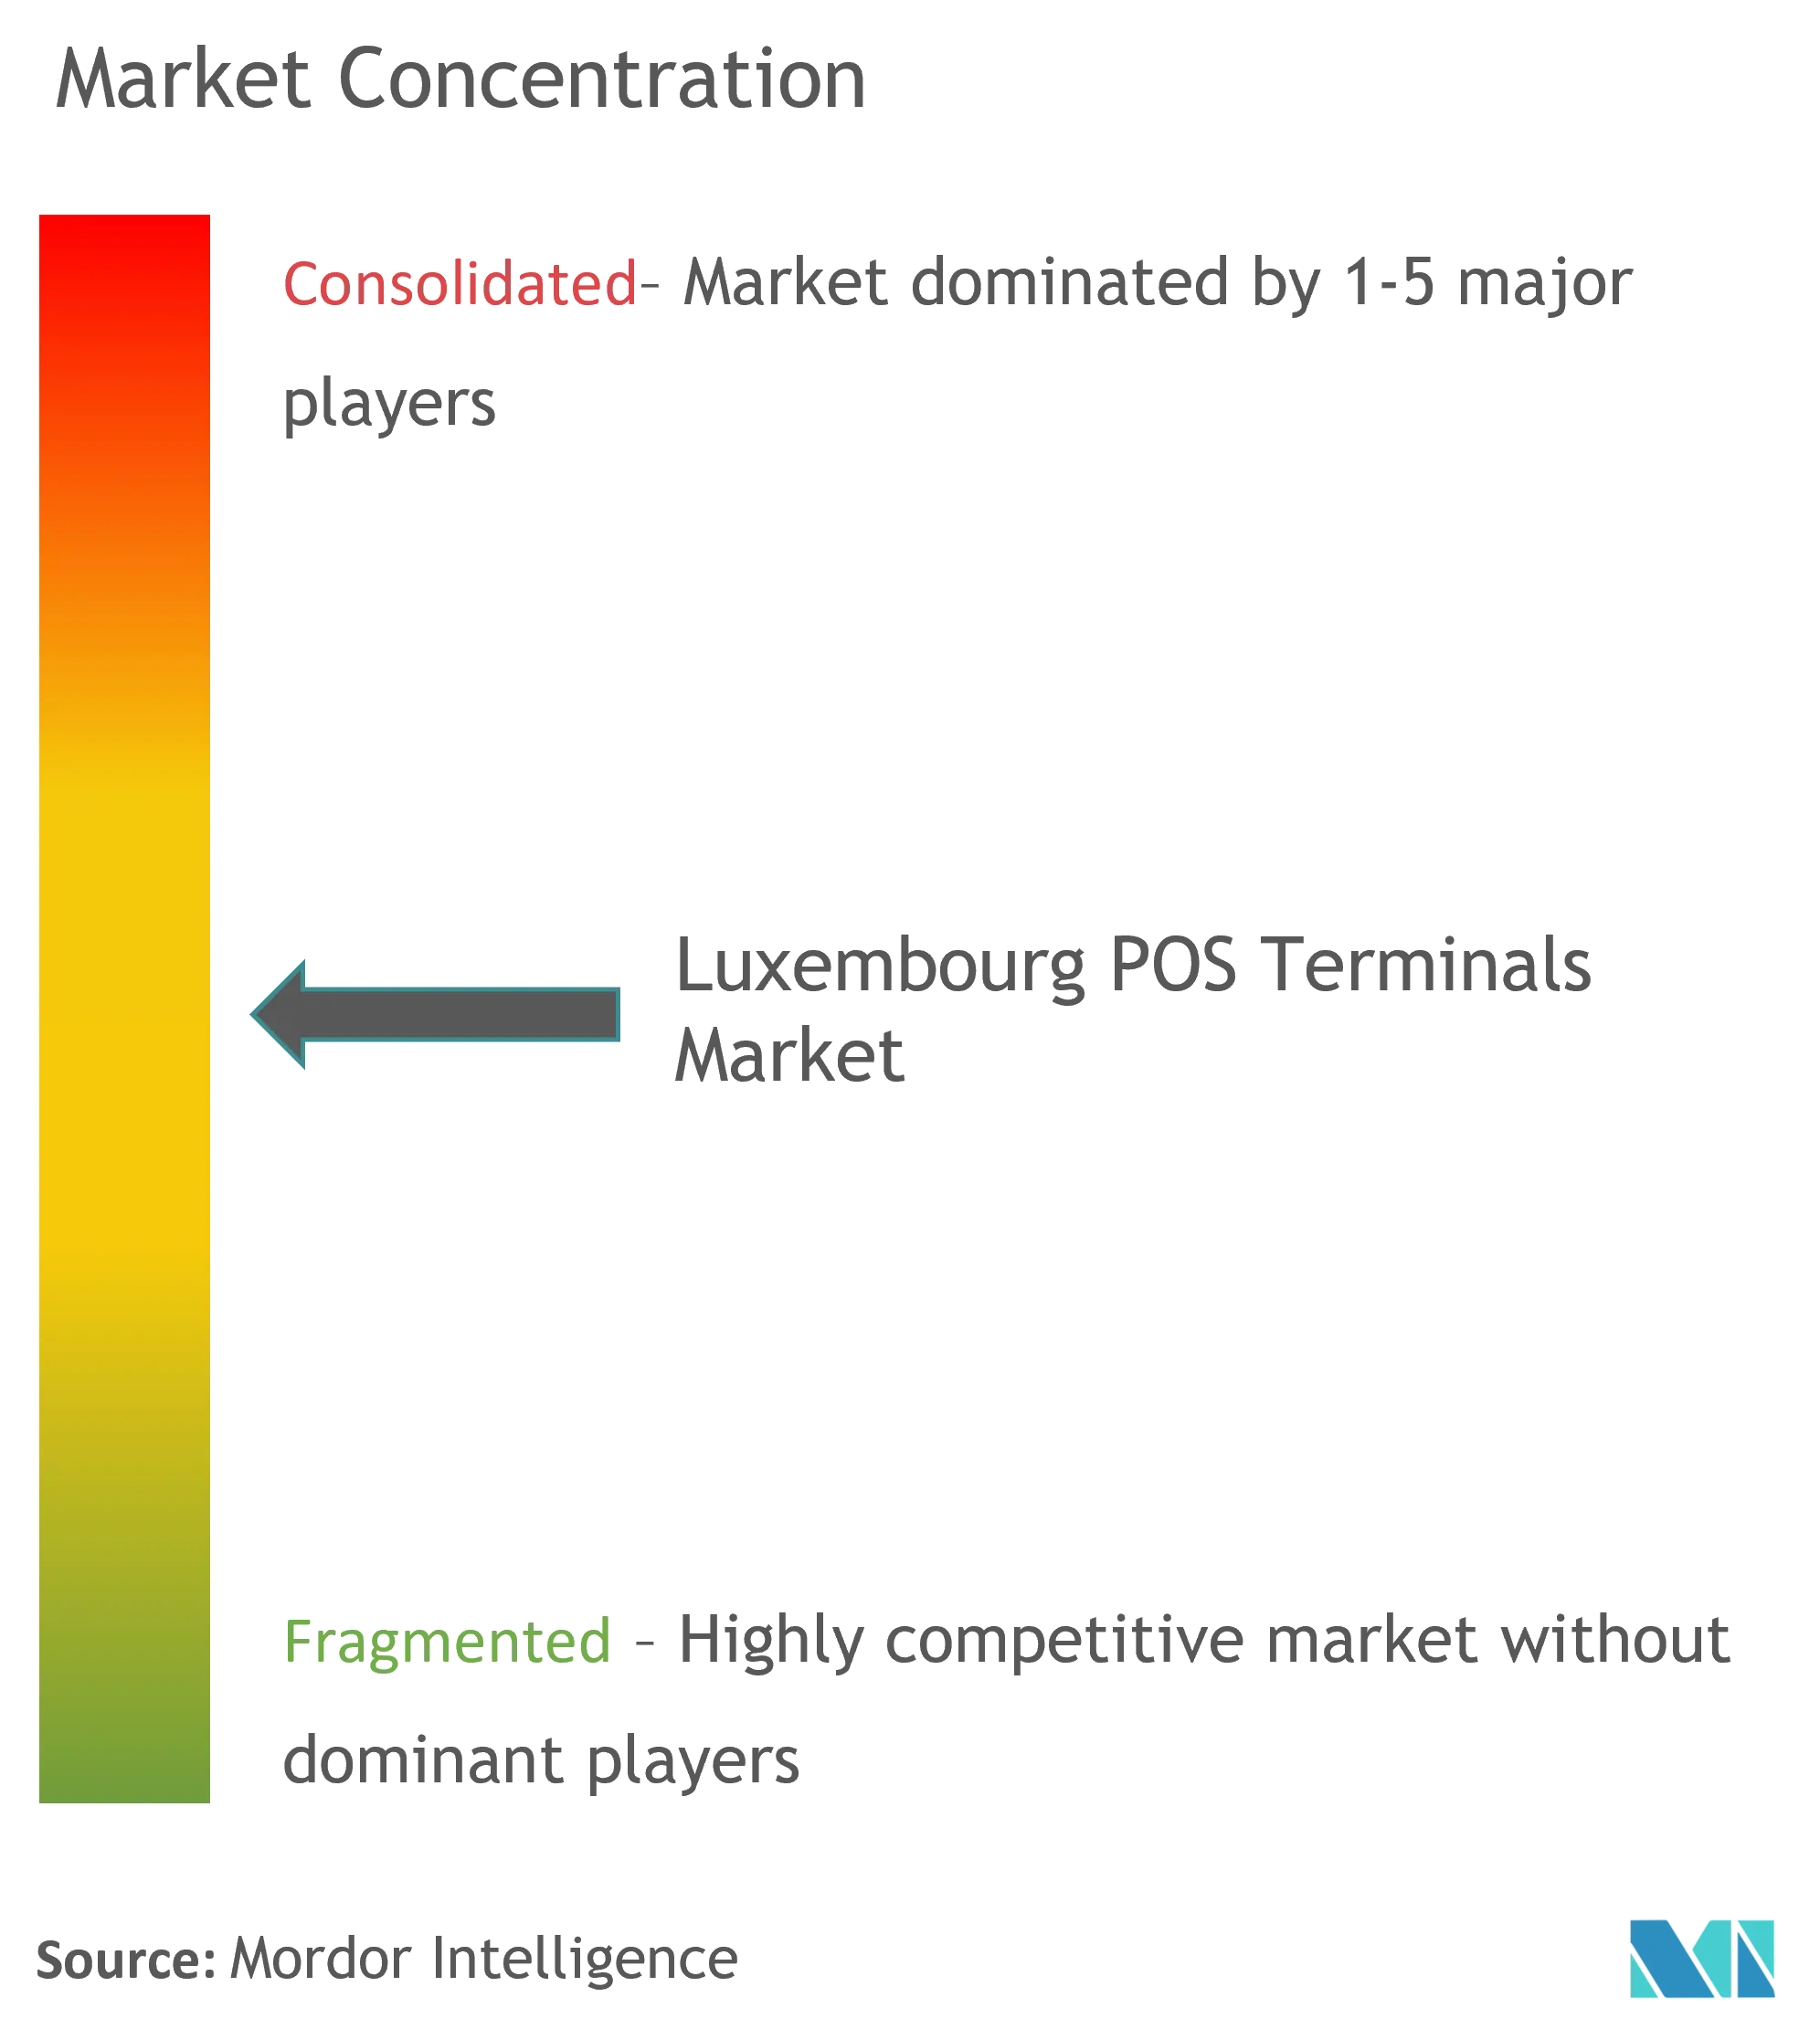 Luxembourg POS Terminals Market Concentration